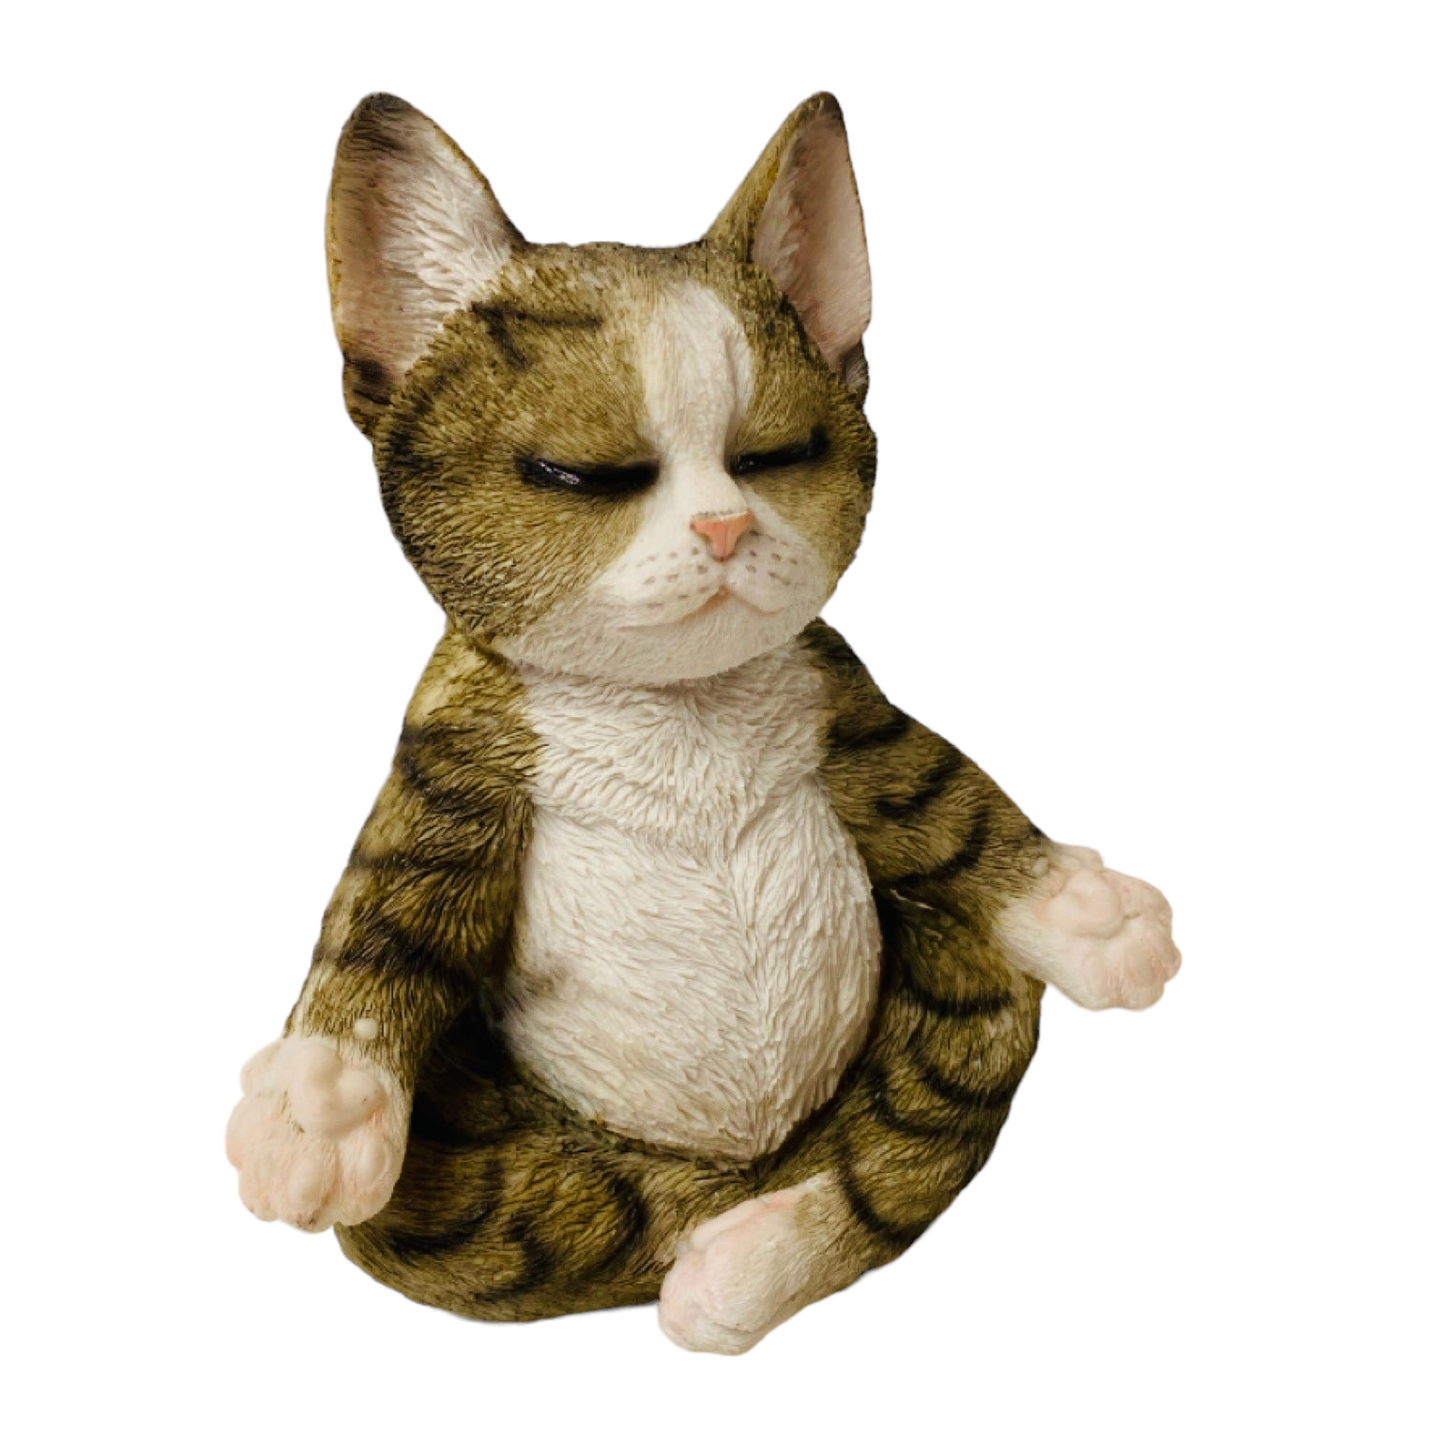 Cat Yoga Meditate Misty Ornament - The Renmy Store Homewares & Gifts 